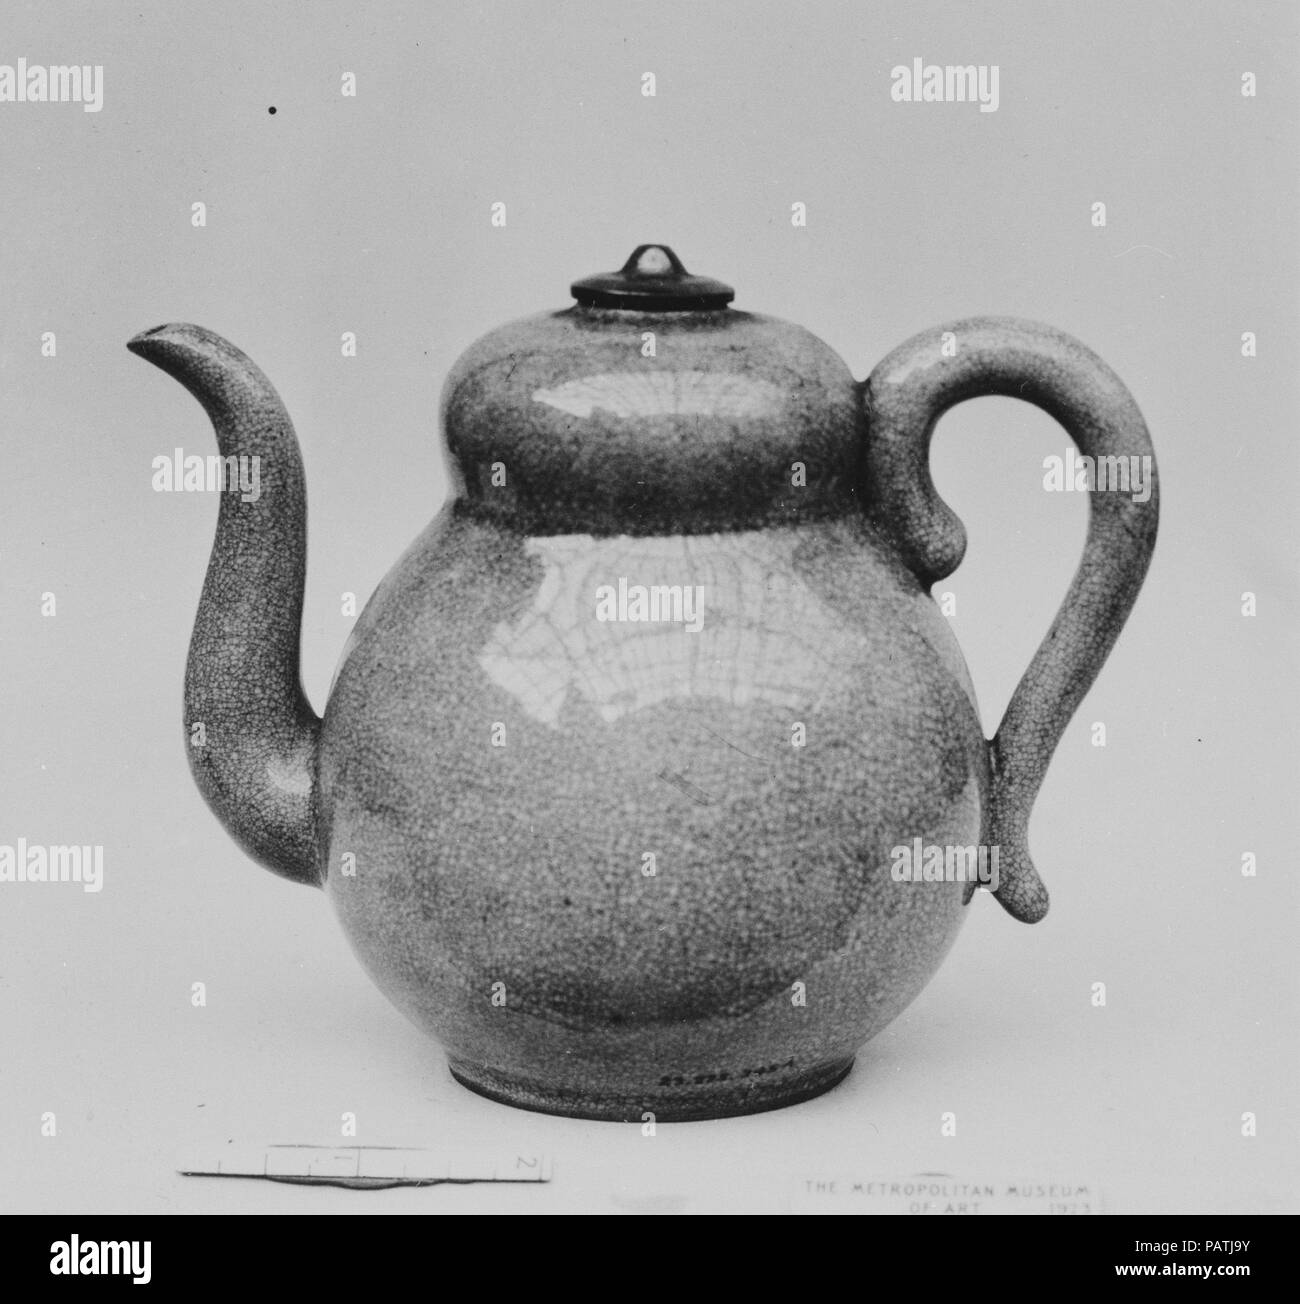 Sencha Water Pitcher (Suichu). Culture: Japan. Dimensions: H. incl. lid  5 in. (12.7 cm); W. (spout to handle) 5 7/8 in. (14.9 cm). Date: early 19th century. Museum: Metropolitan Museum of Art, New York, USA. Stock Photo